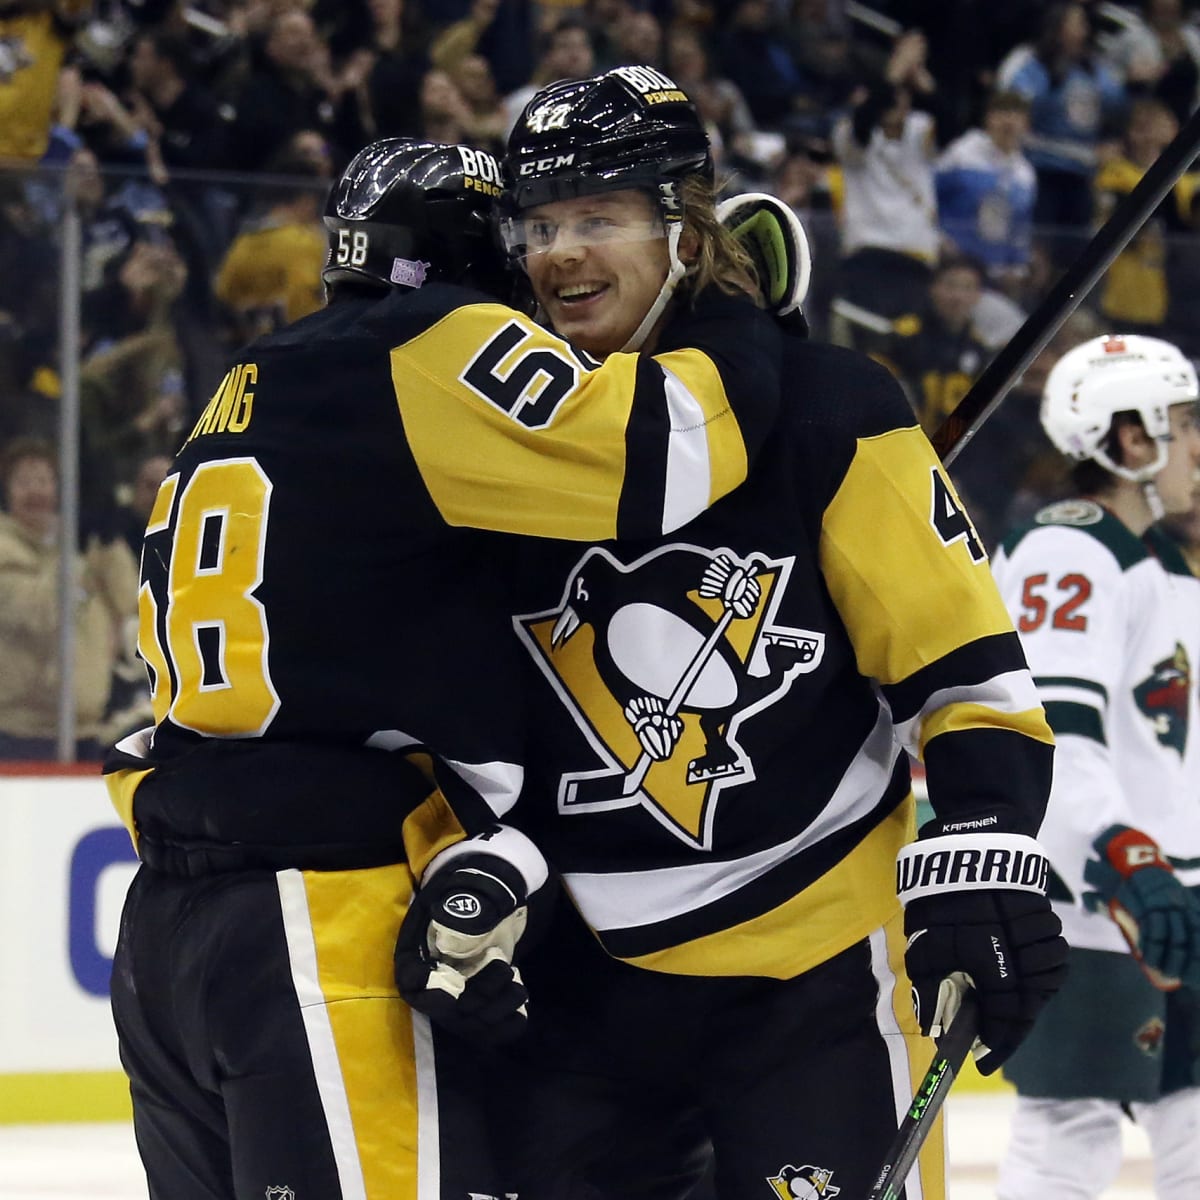 watch pittsburgh penguins online free